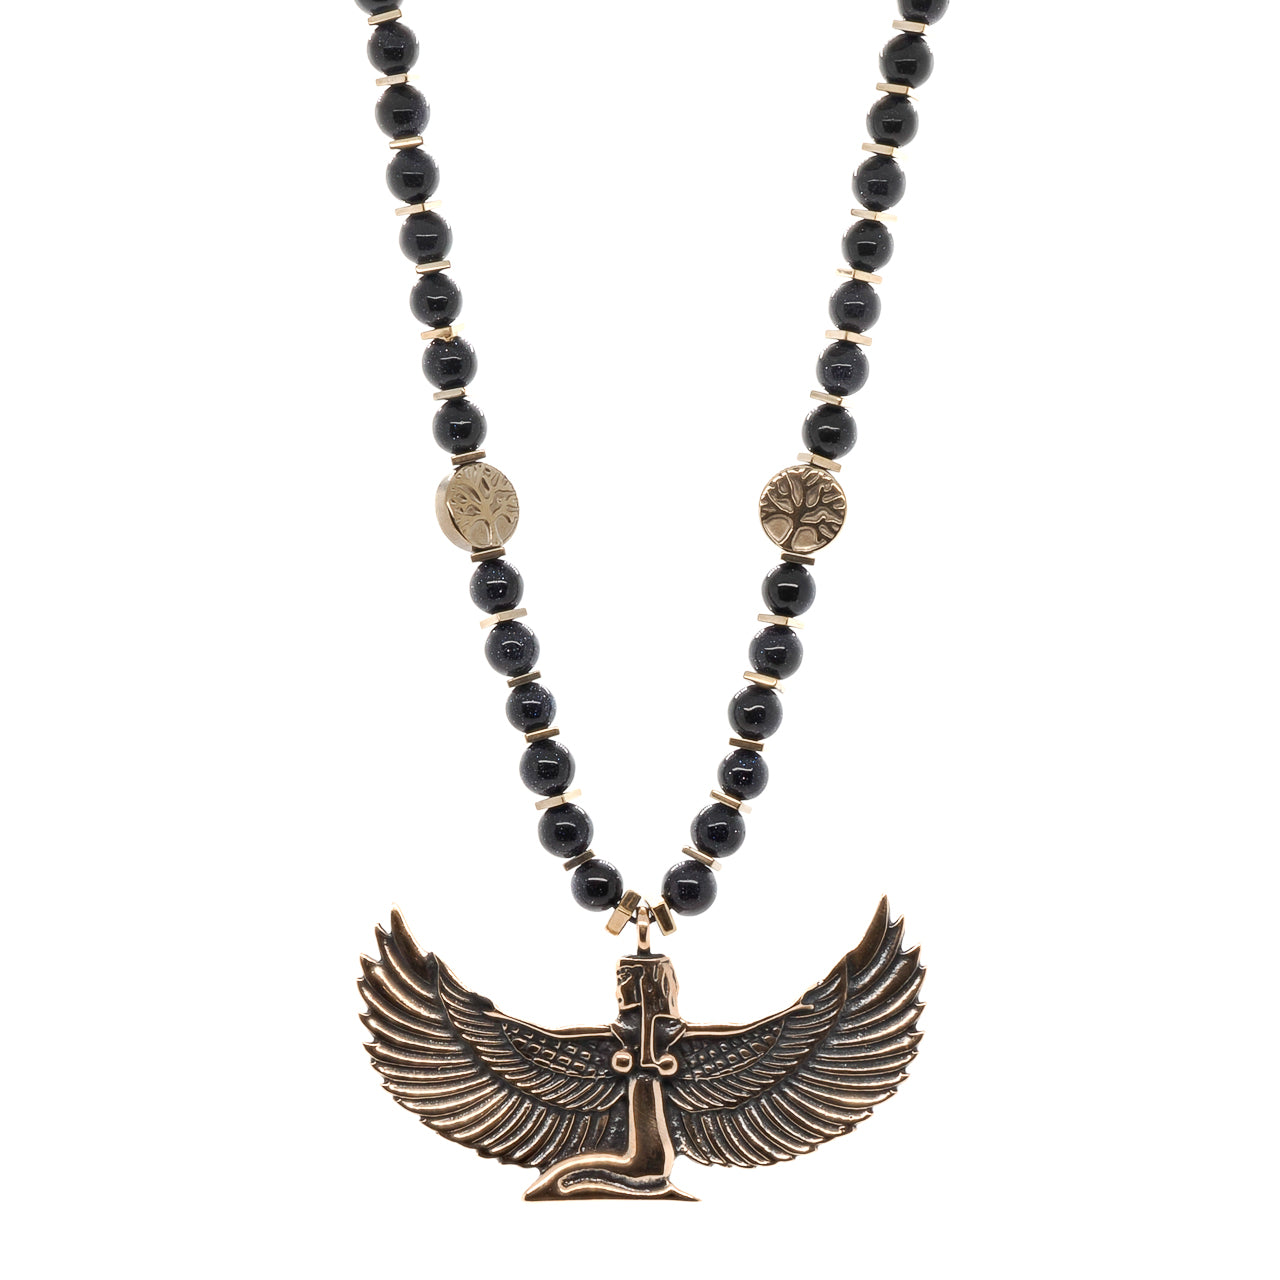 Egyptian Goddess Isis Necklace with Tree of Life Beads, a symbol of spiritual connection and healing.